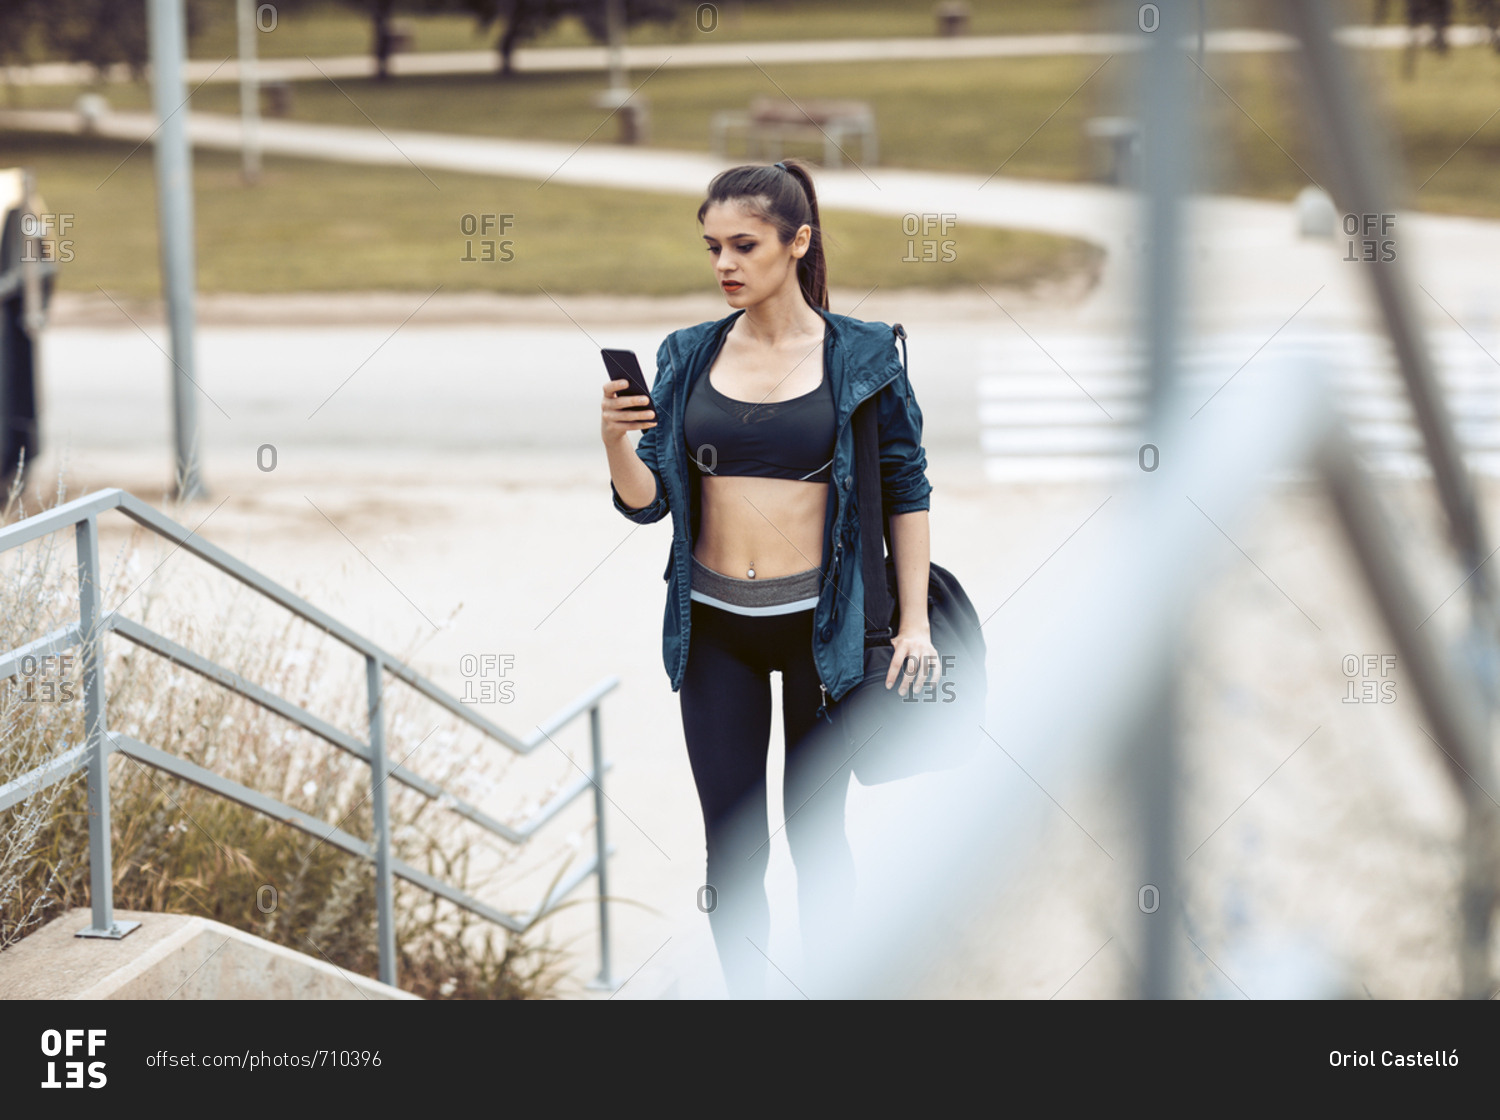 Young woman in sportswear carrying bag pauses to check phone after workout